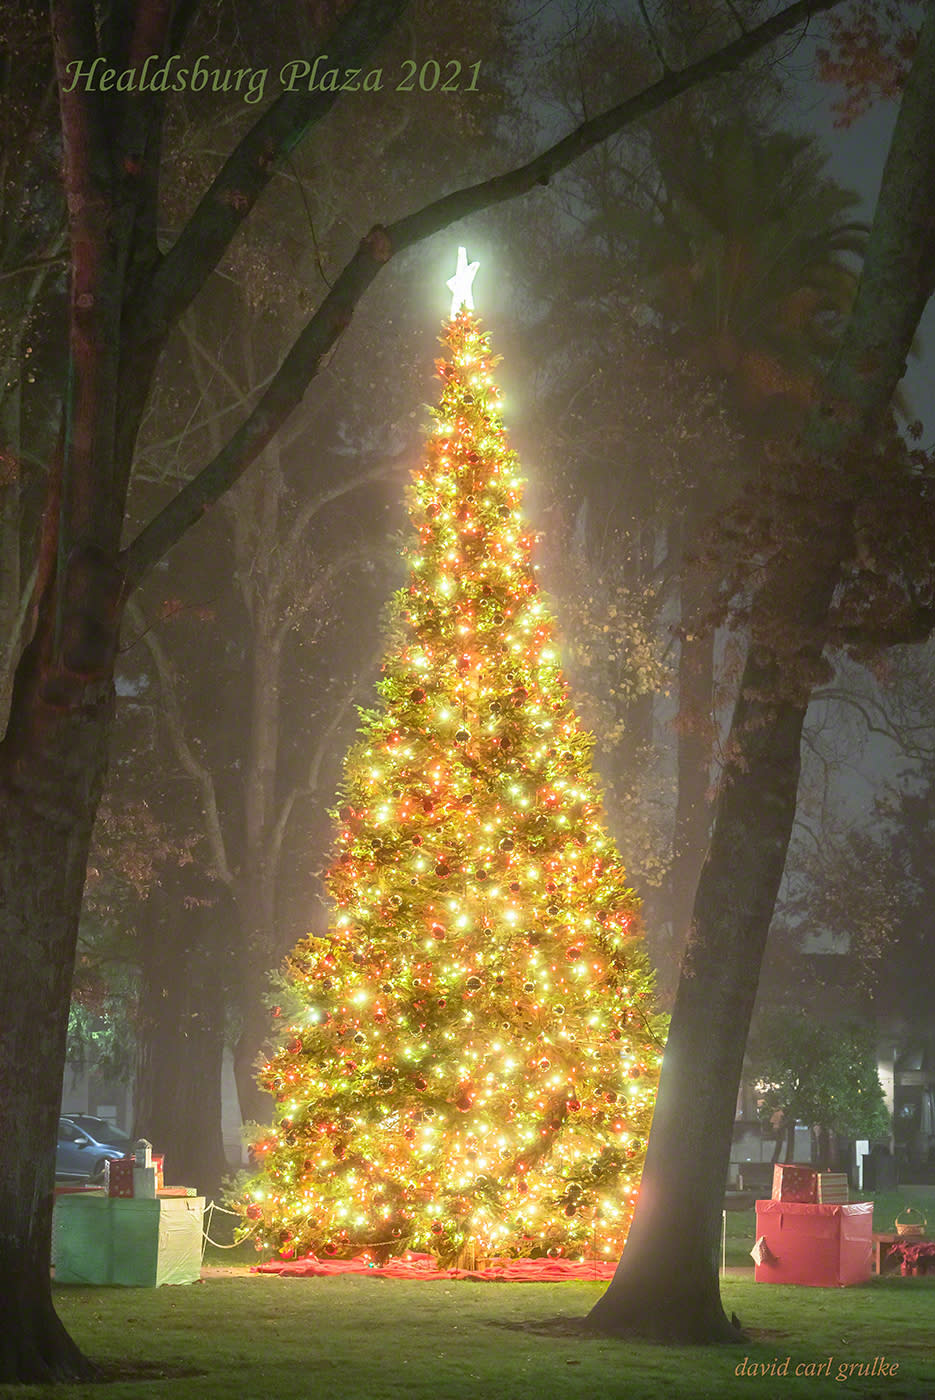 The Christmas tree at the Healdsburg Plaza, as seen in the misty wee hours Sunday morning. (Photo courtesy of David Grulke)